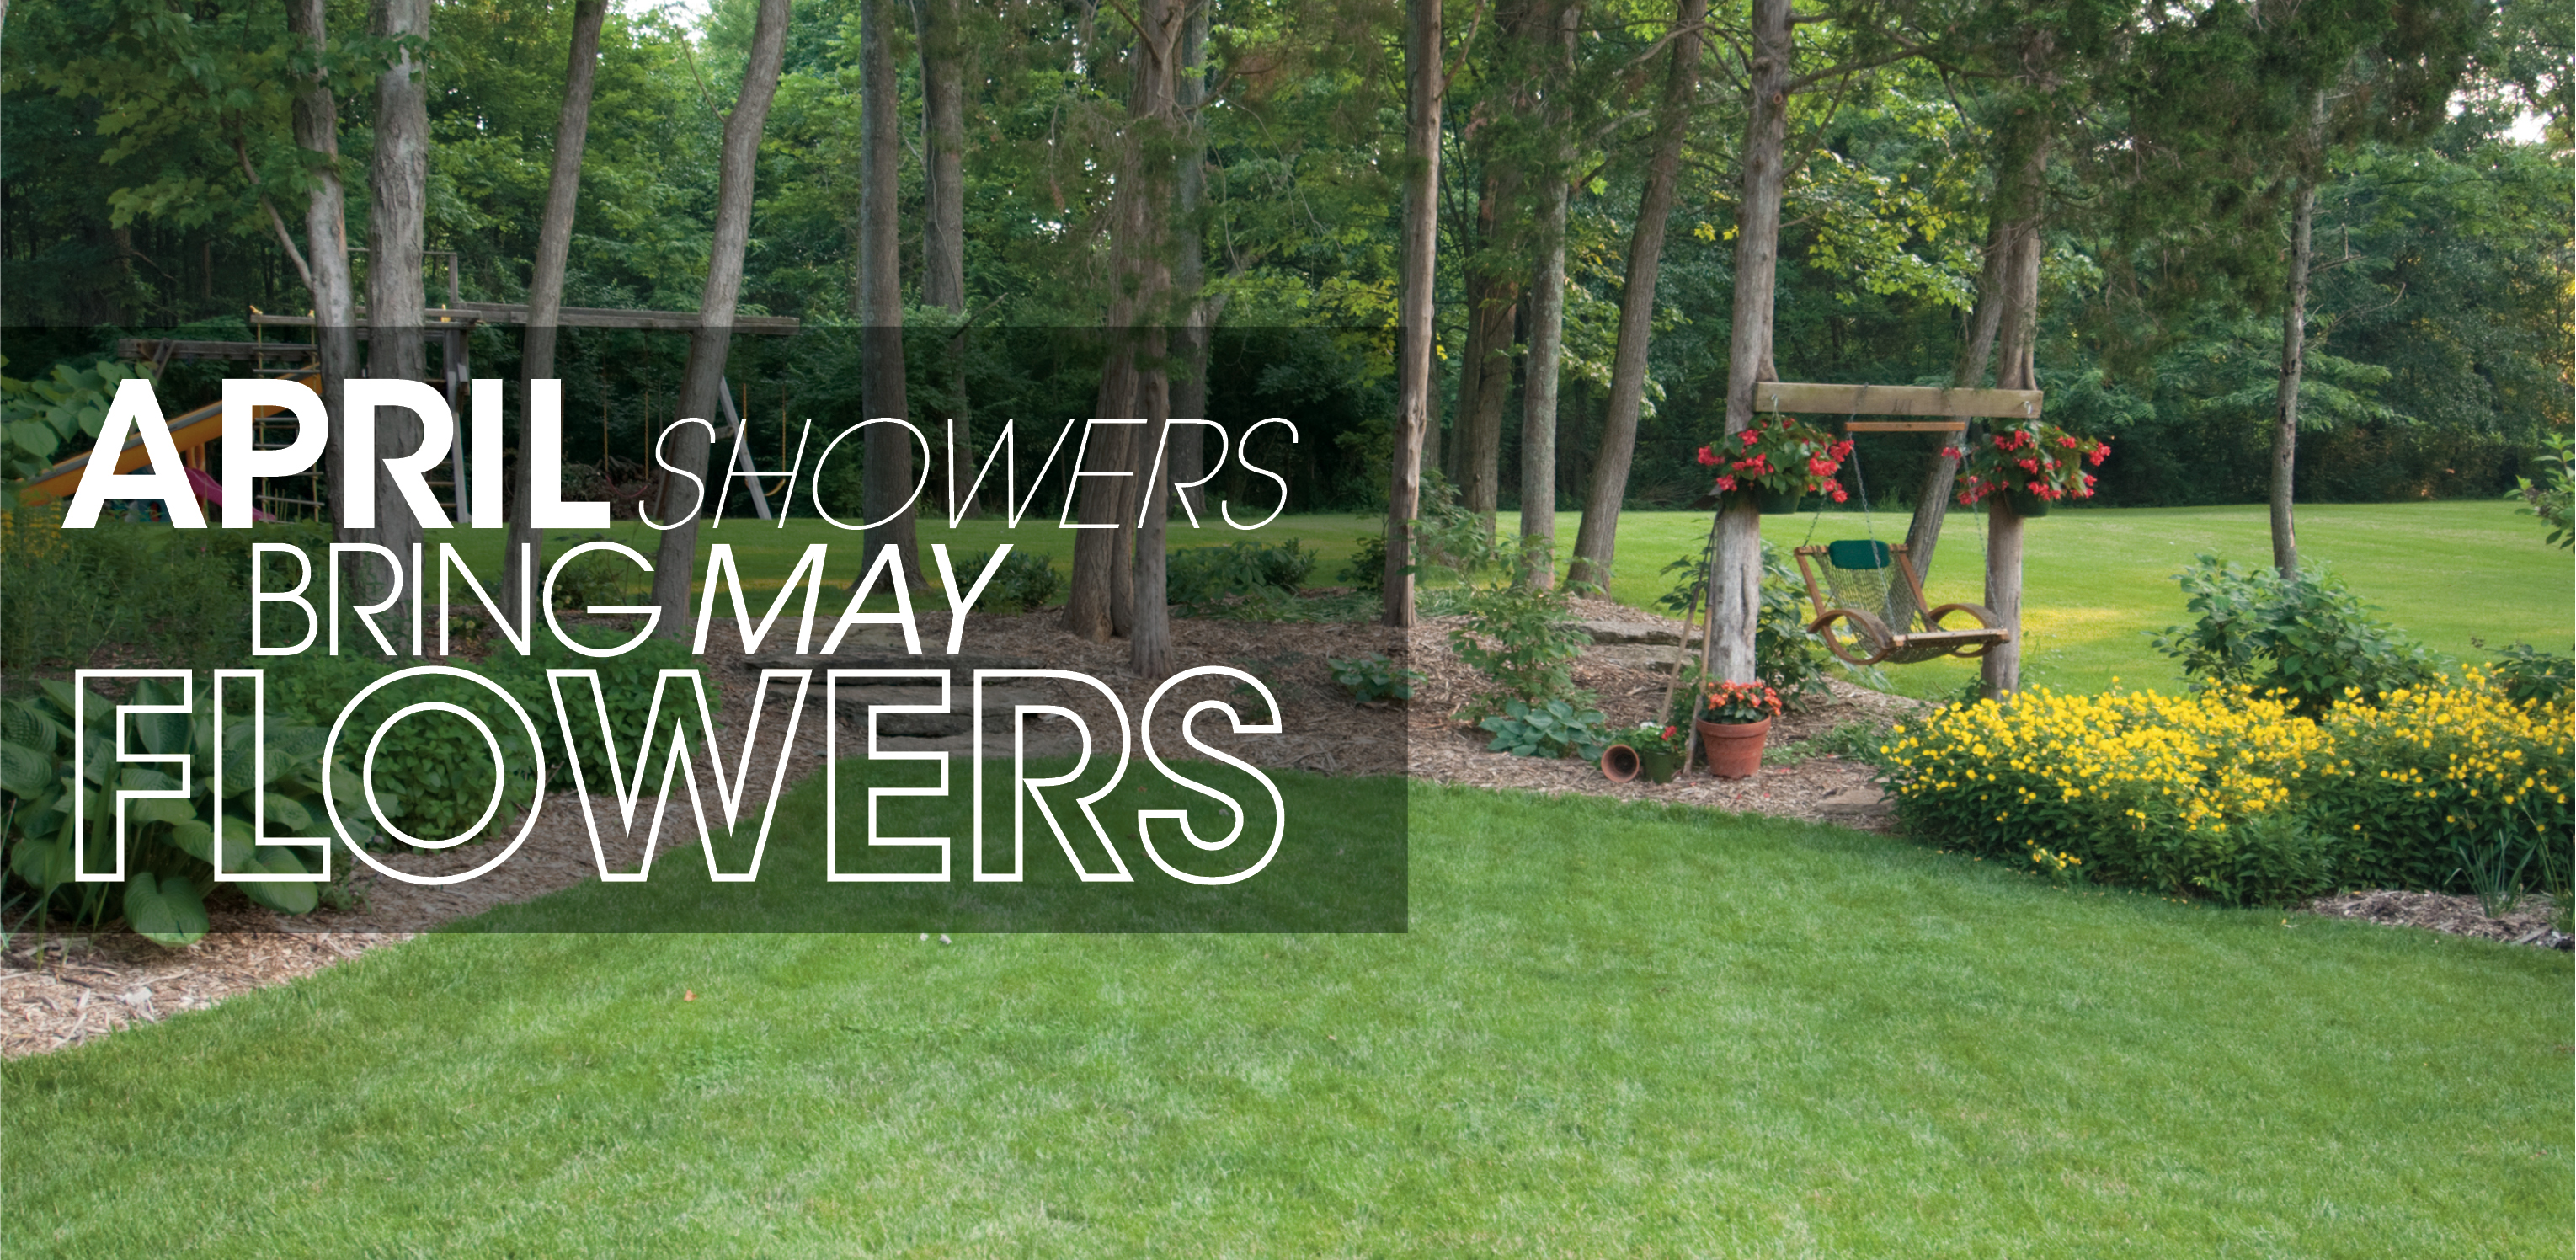 Lawn and trees with text: "April showers bring May flowers"